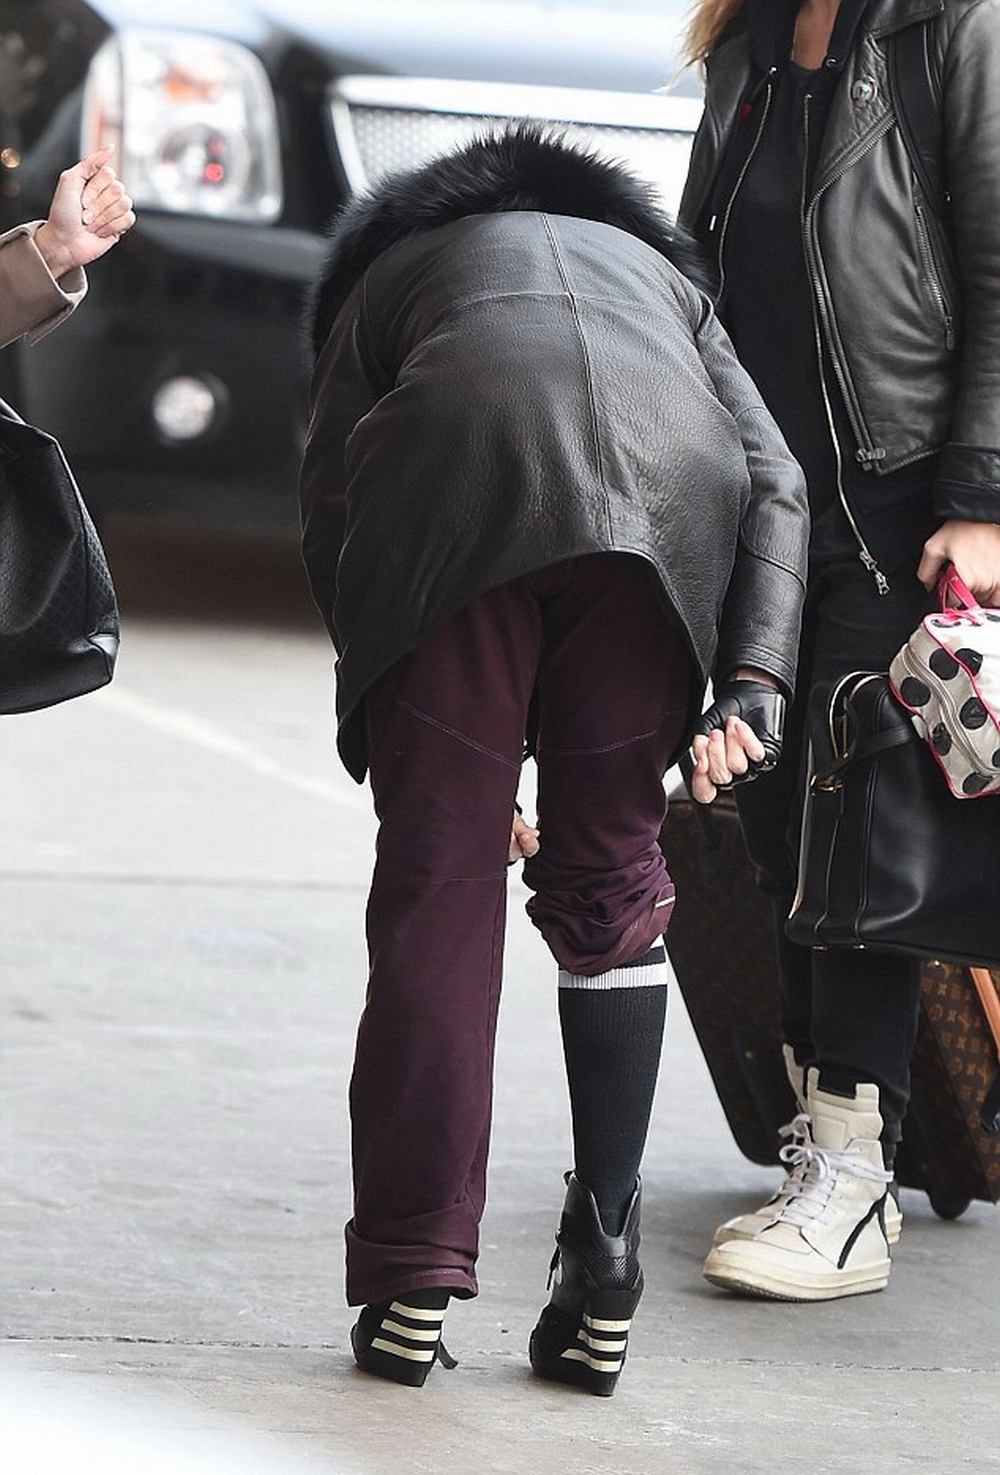 Madonna at JFK airport, New York - 1 February 2015 - Pictures (8)